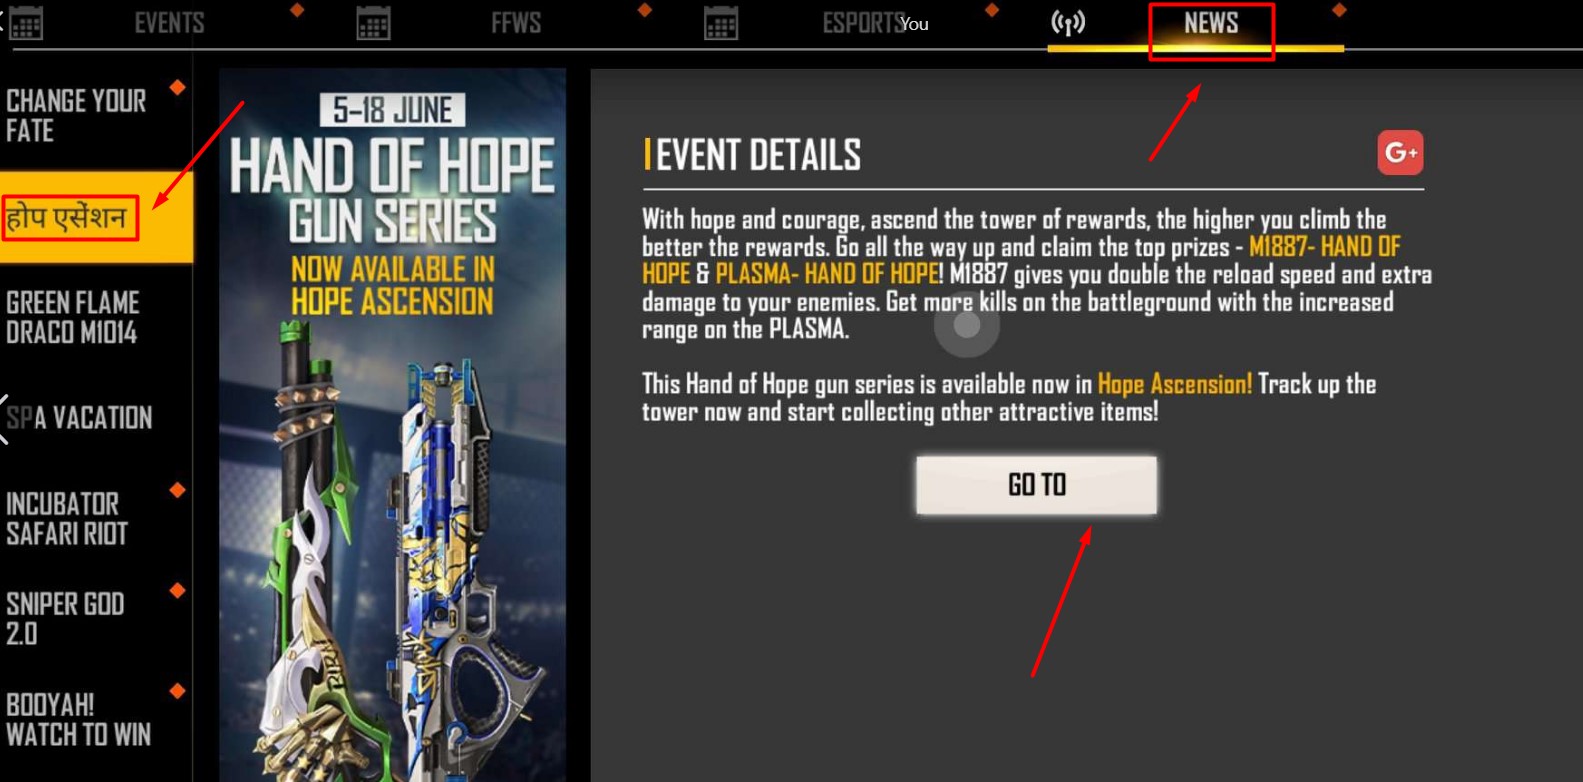 Hope Ascension Event: How to get M1887- Hand of Hope gun skin in Free Fire